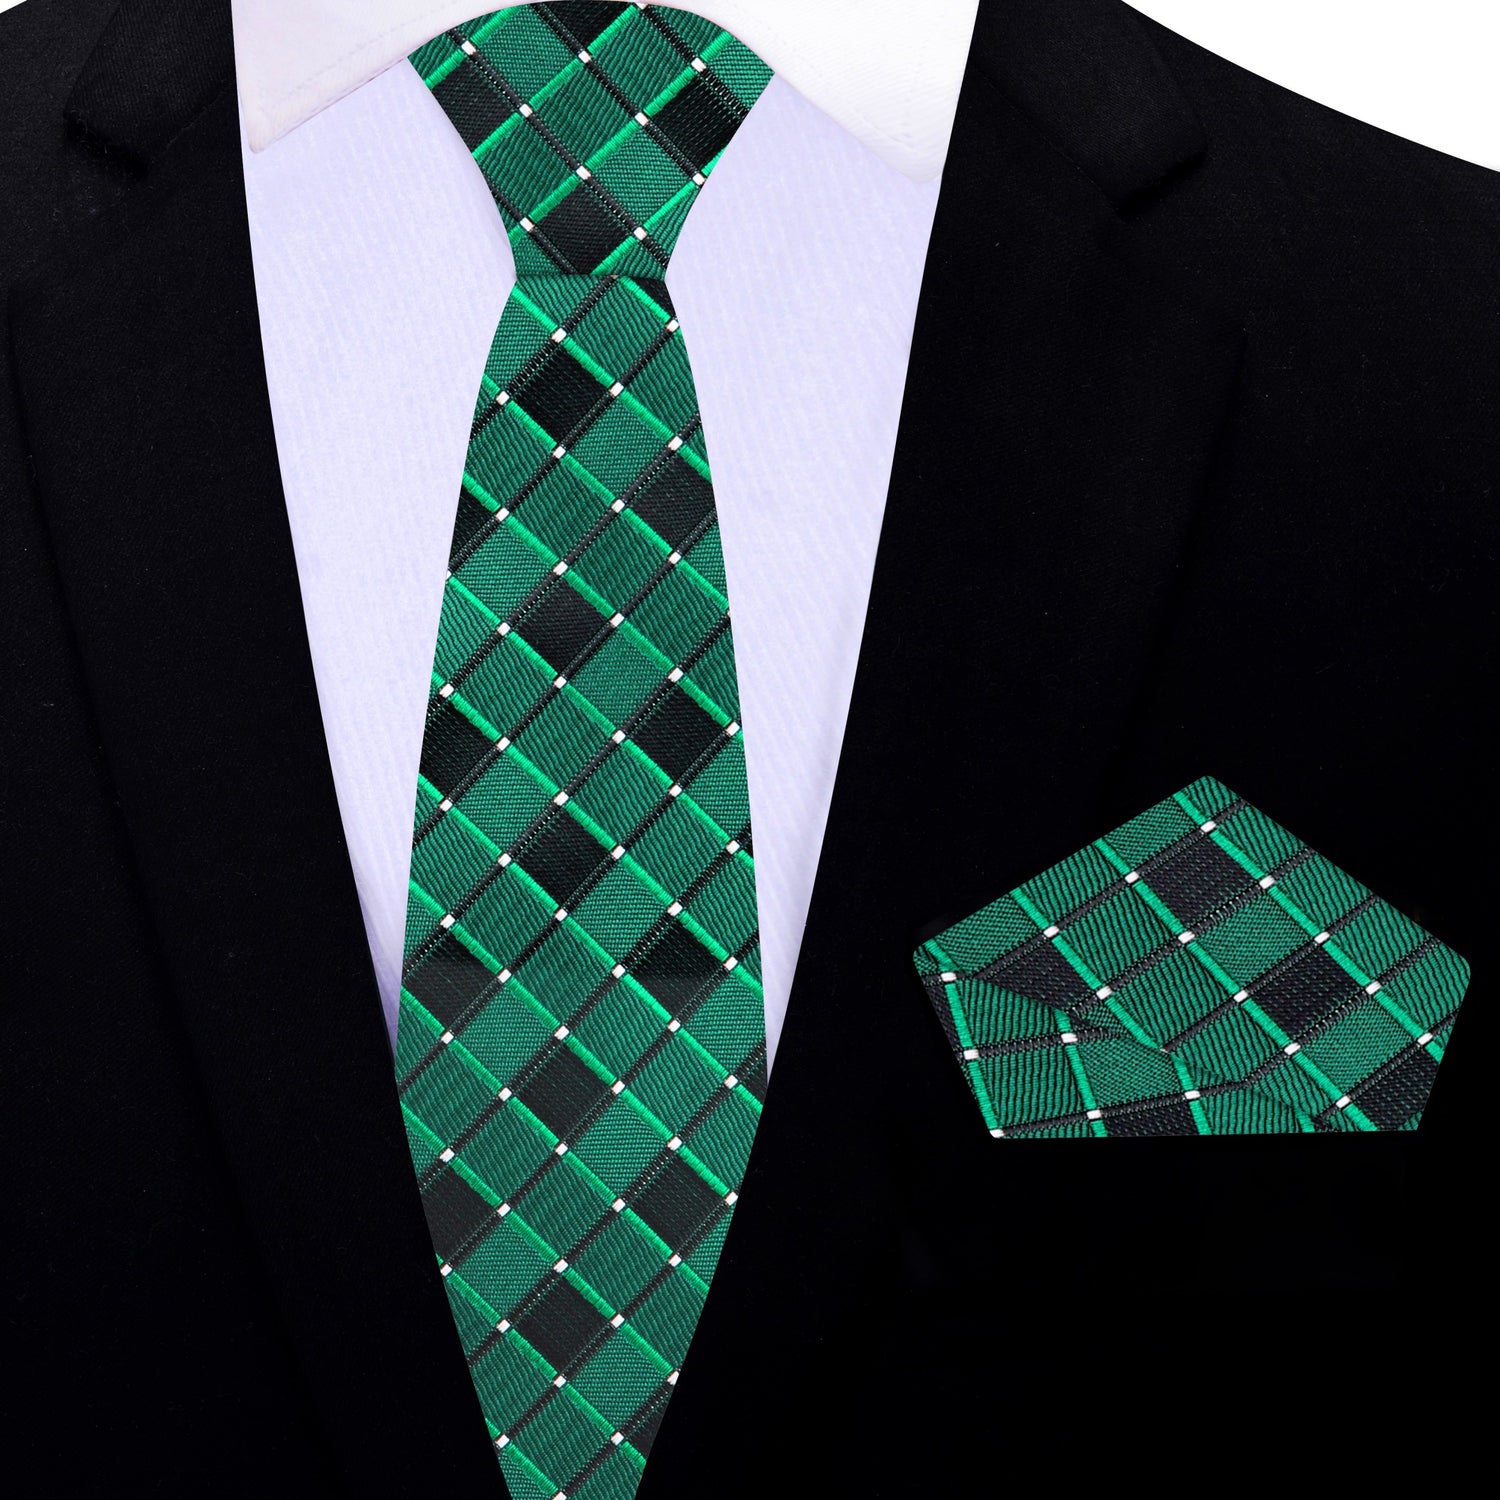 Thin Tie: Green Geometric Necktie and Accenting Blue, White, Yellow and Green Stripe Square